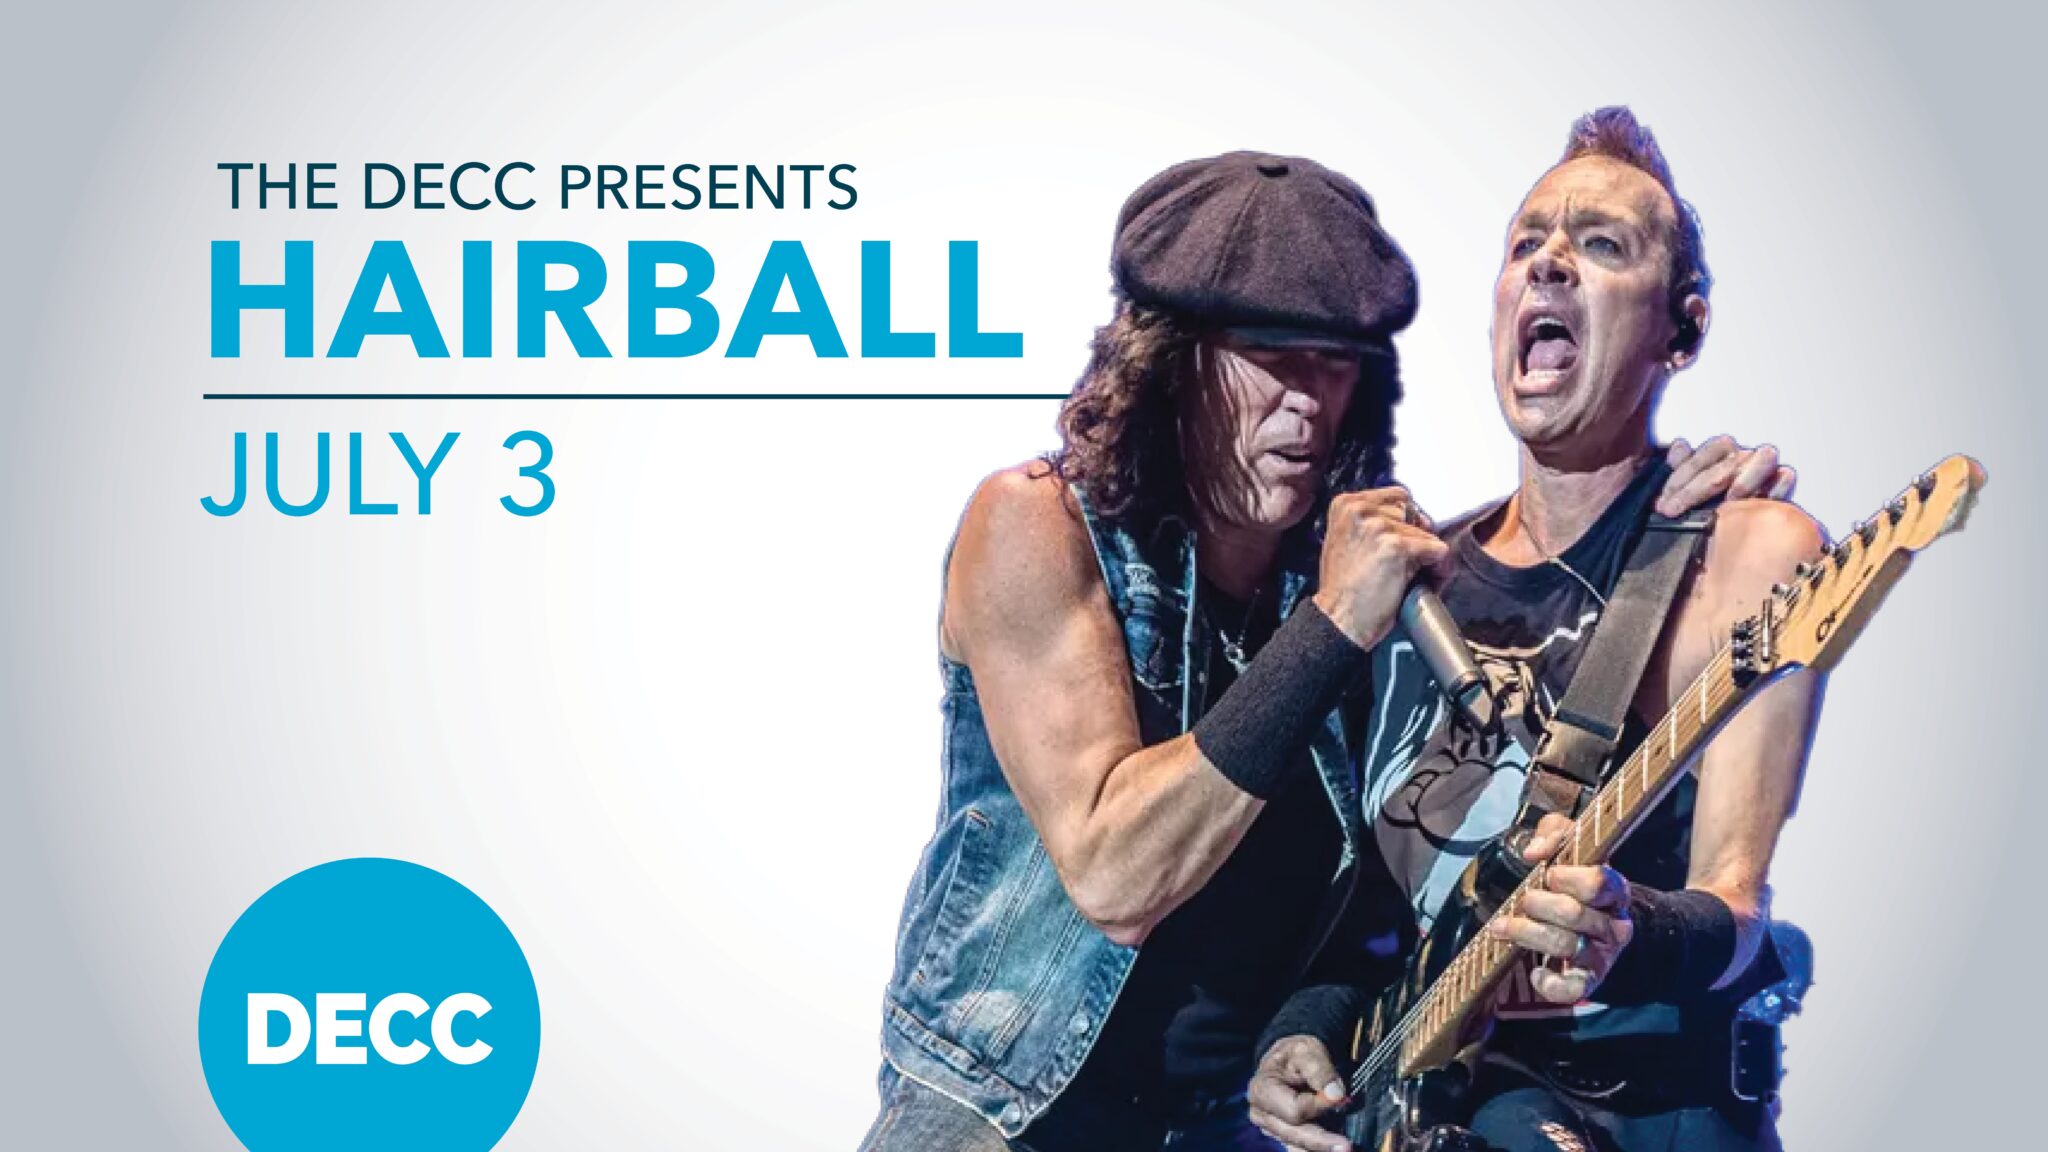 Fans excited for Hairball's return to Bayfront for their pre4th of